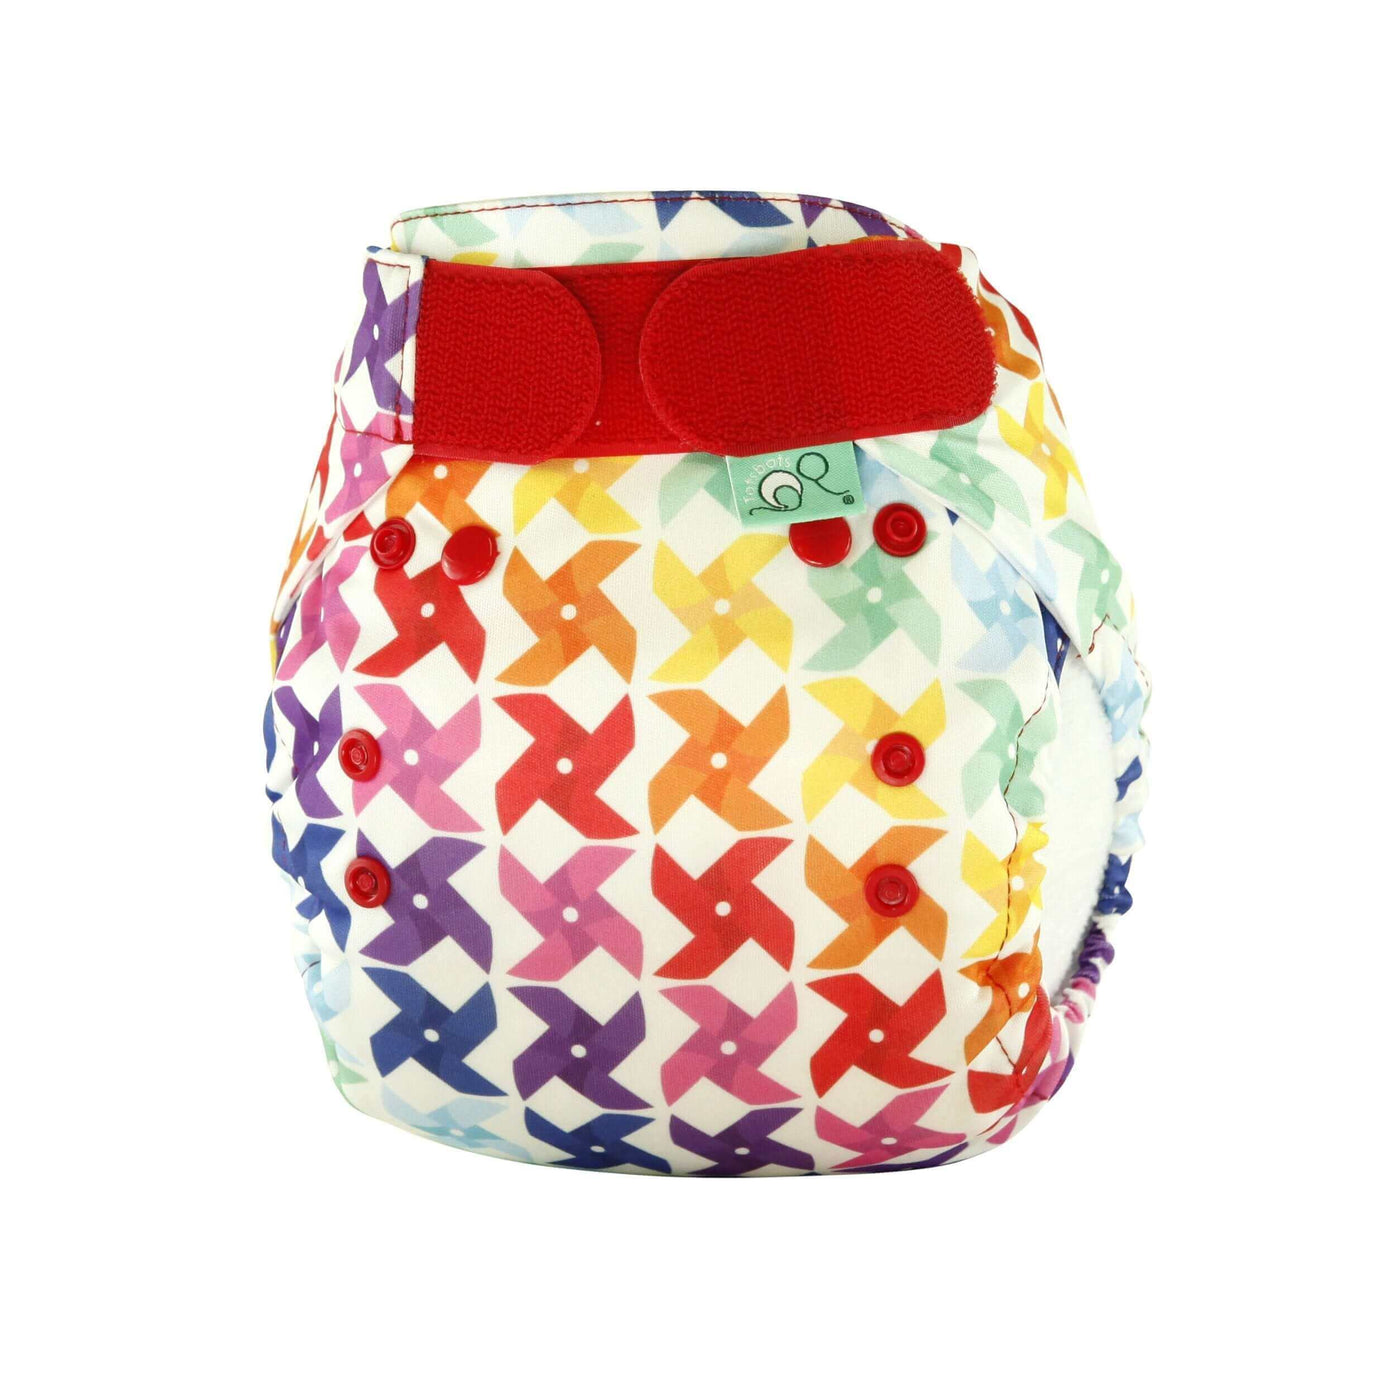 Tots Bots Bamboozle Nappy Wrap Colour: Whirl Size: Size 1 (6-18lbs) reusable nappies Earthlets